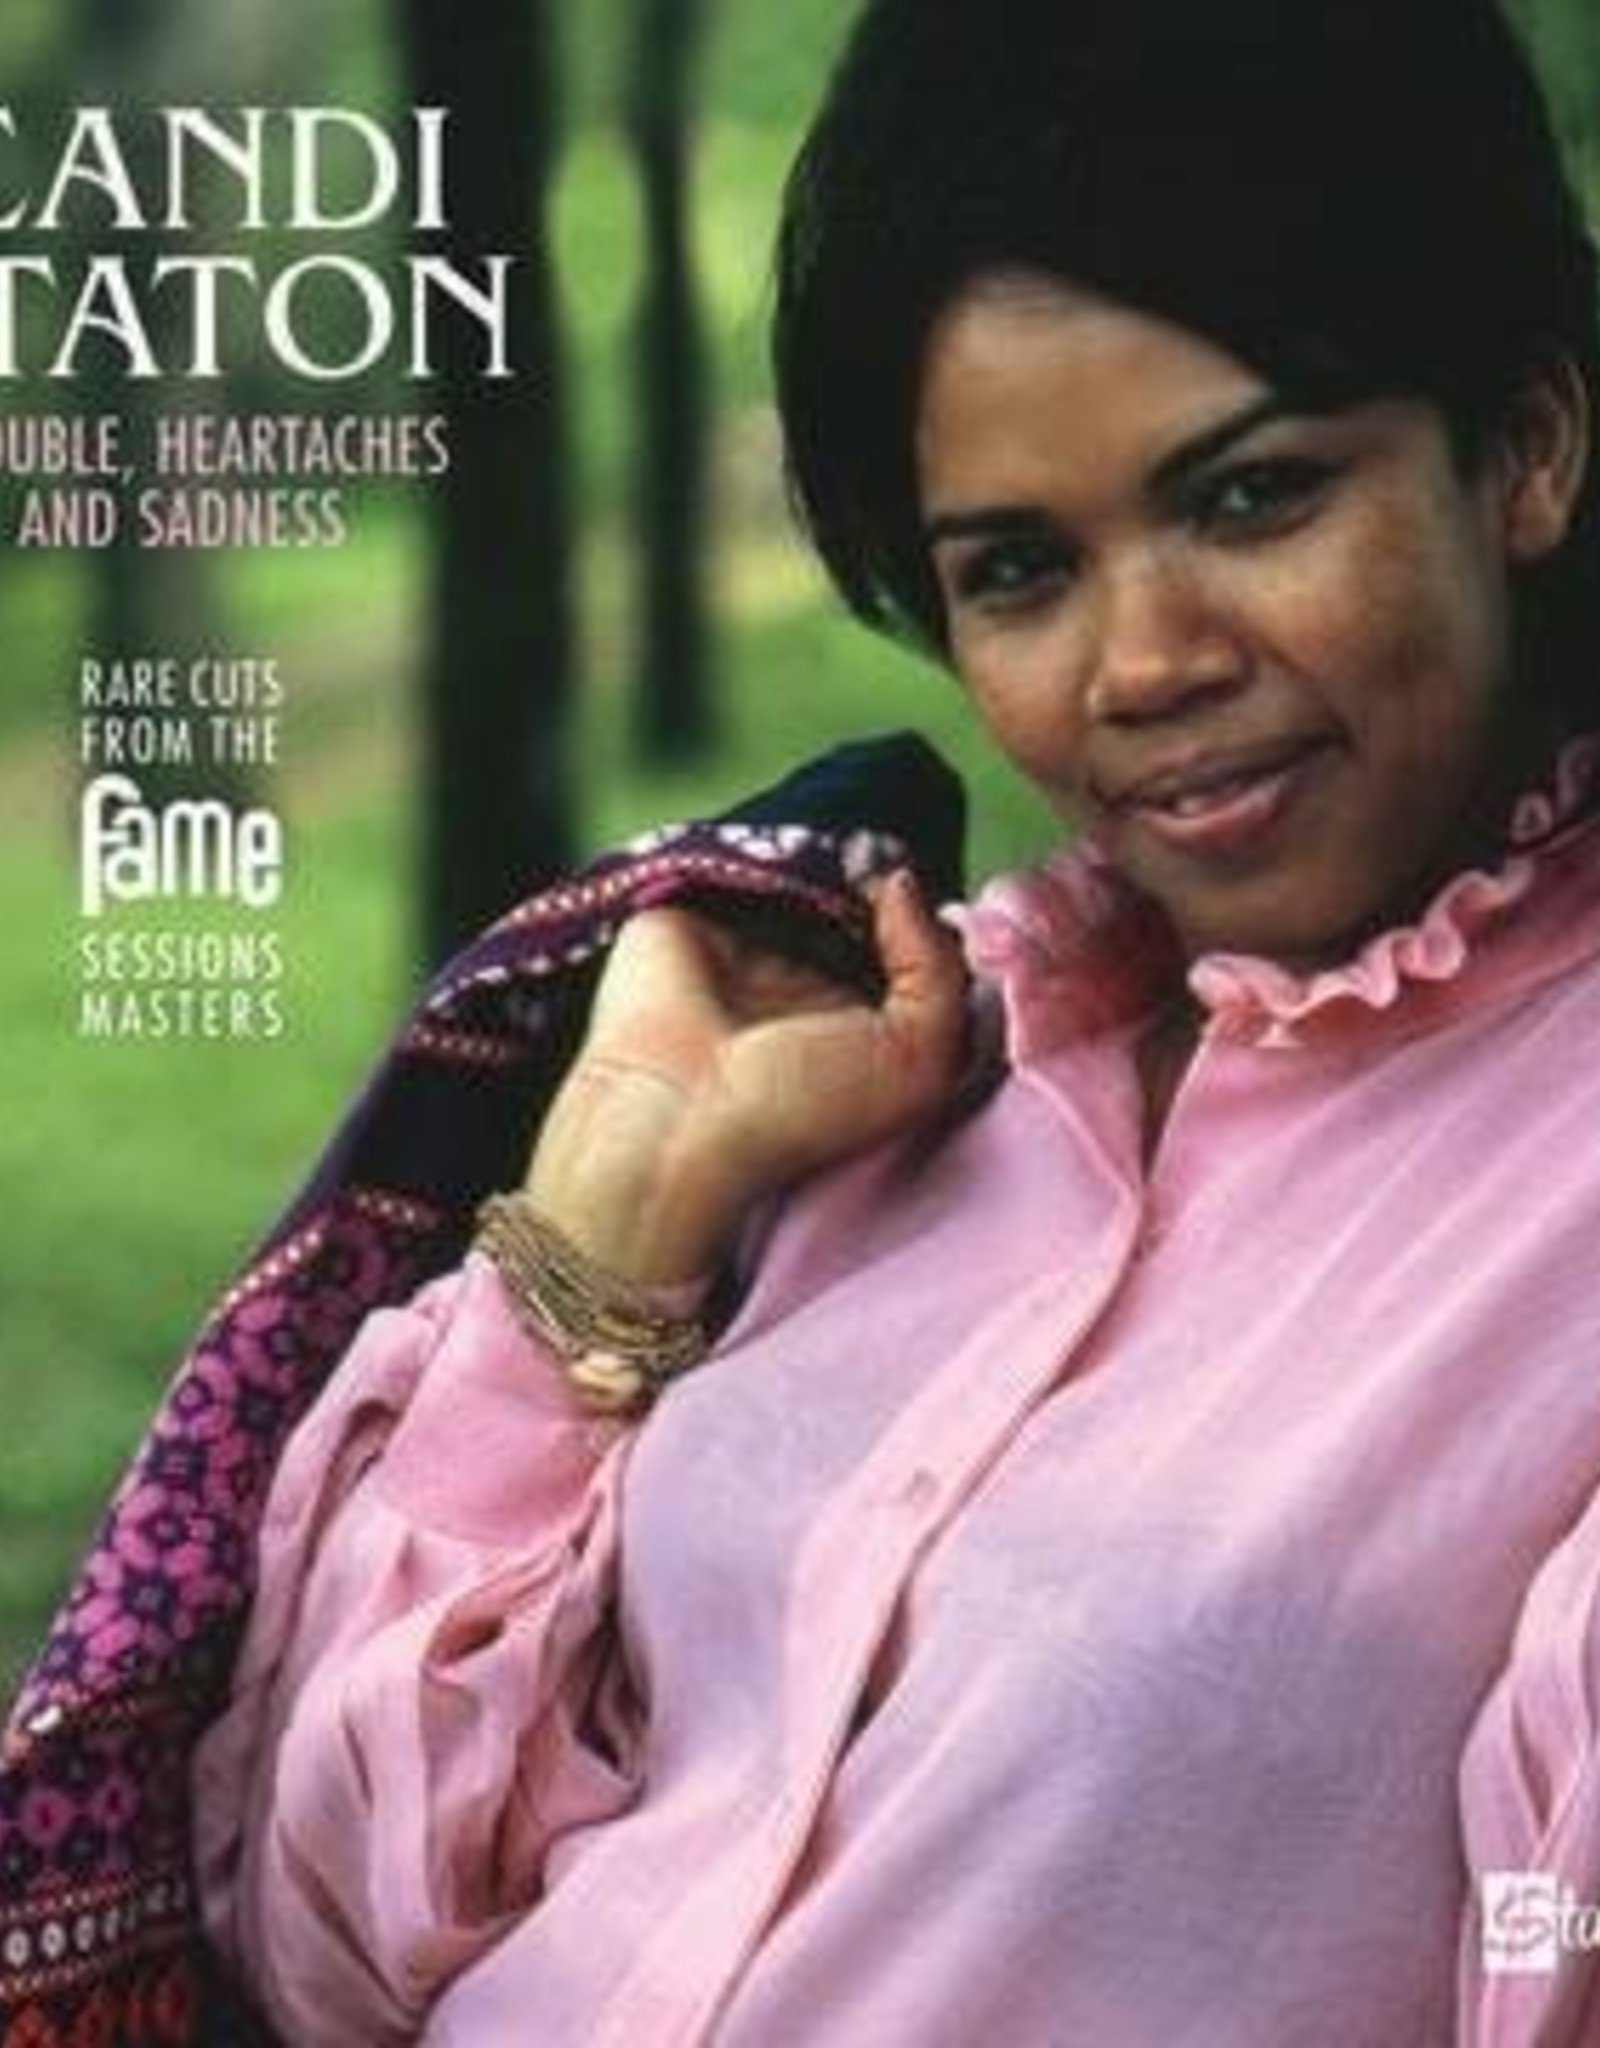 Candi Staton - Trouble, Heartaches And Sadness (The Lost Fame Sessions Masters)  (RSD 7/21)